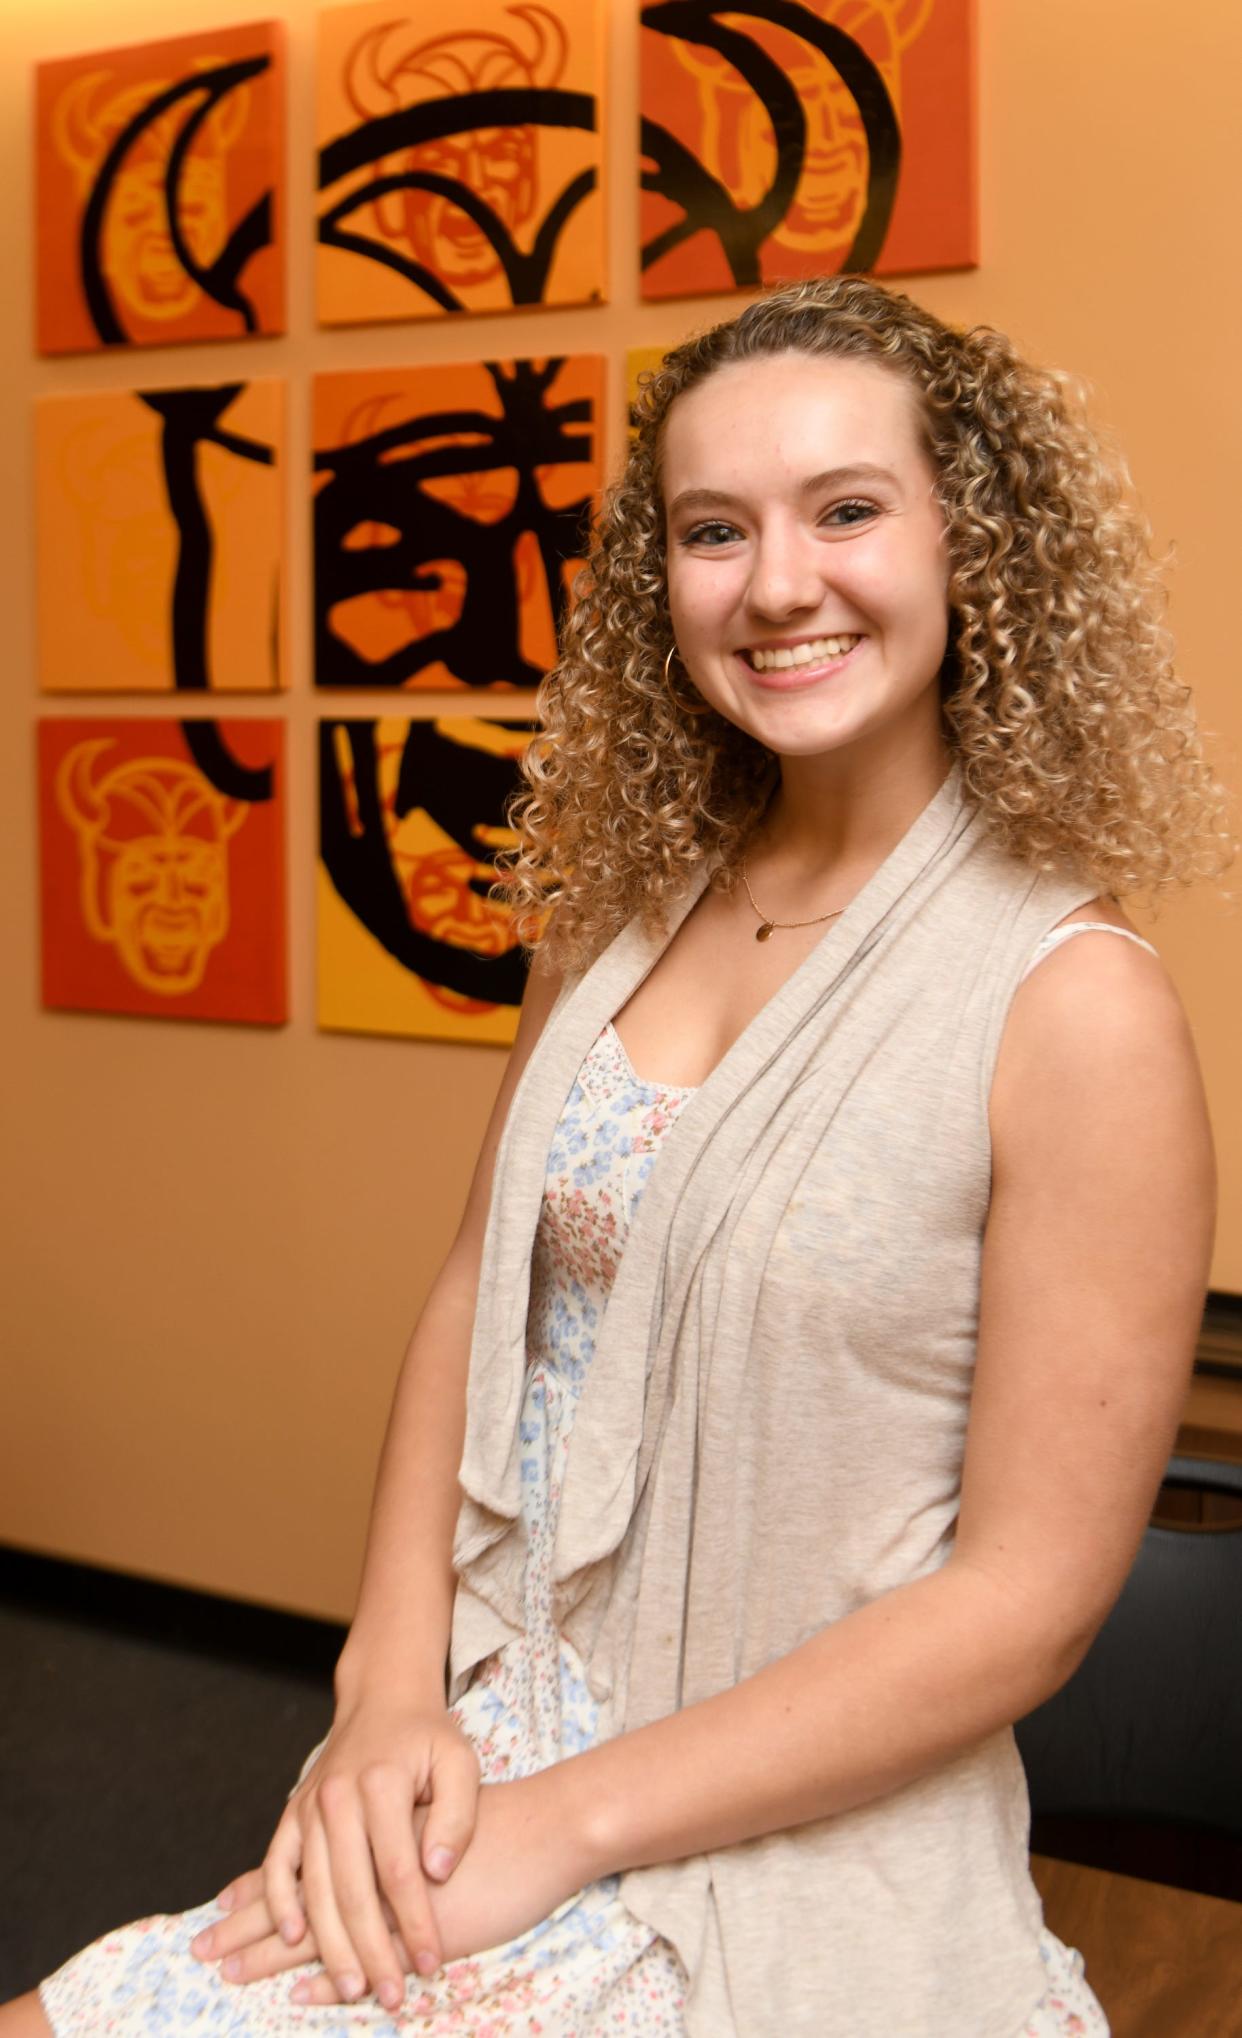 Hoover High School senior Gina Cardinale is the Repository's Stark State College female Teen of the Month for May. She was photographed at school on Tuesday, April 12, 2022.